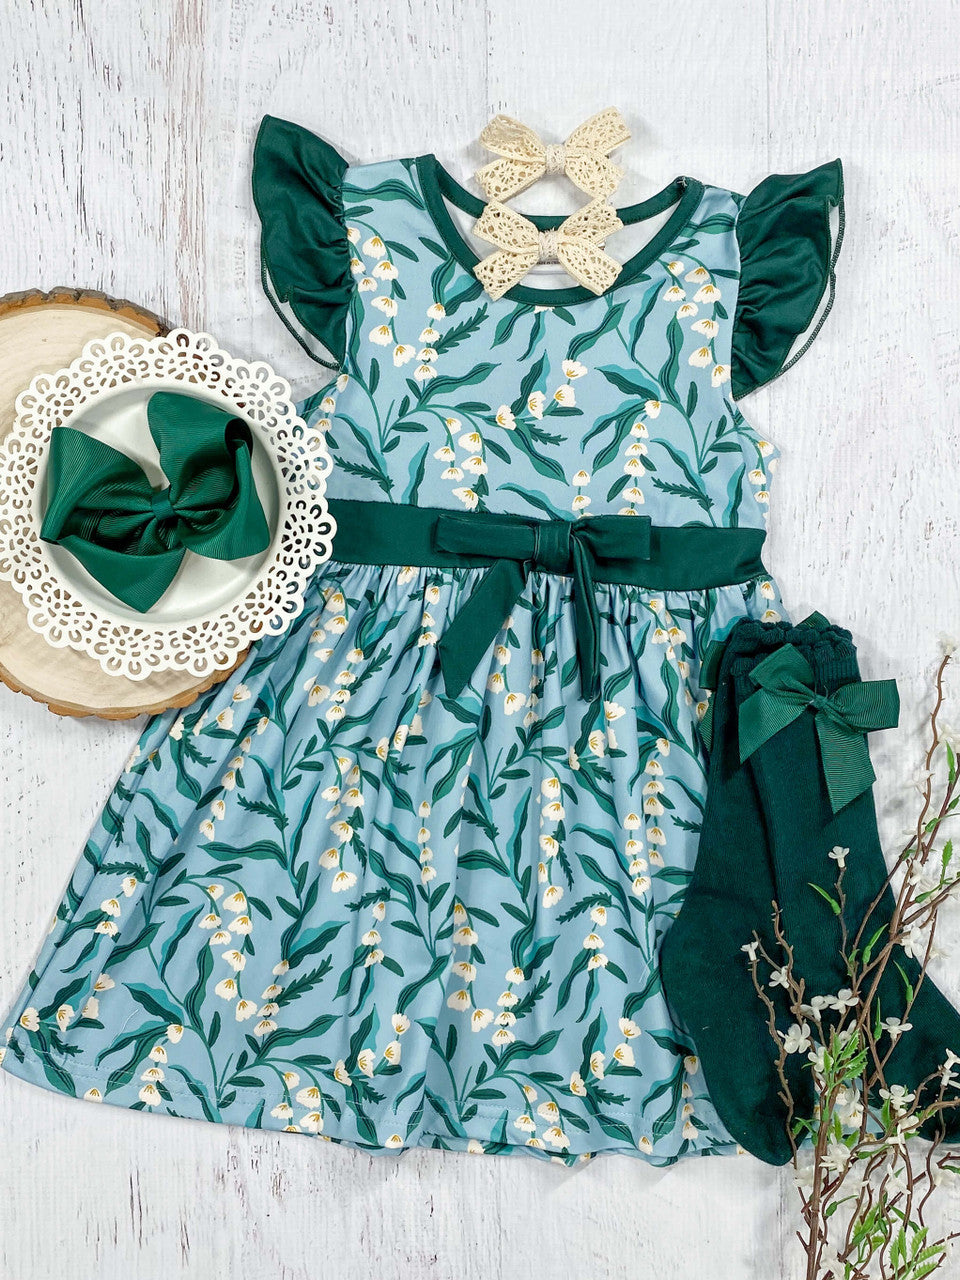  Aqua Floral Patterned Sundress With Hunter Green Accents